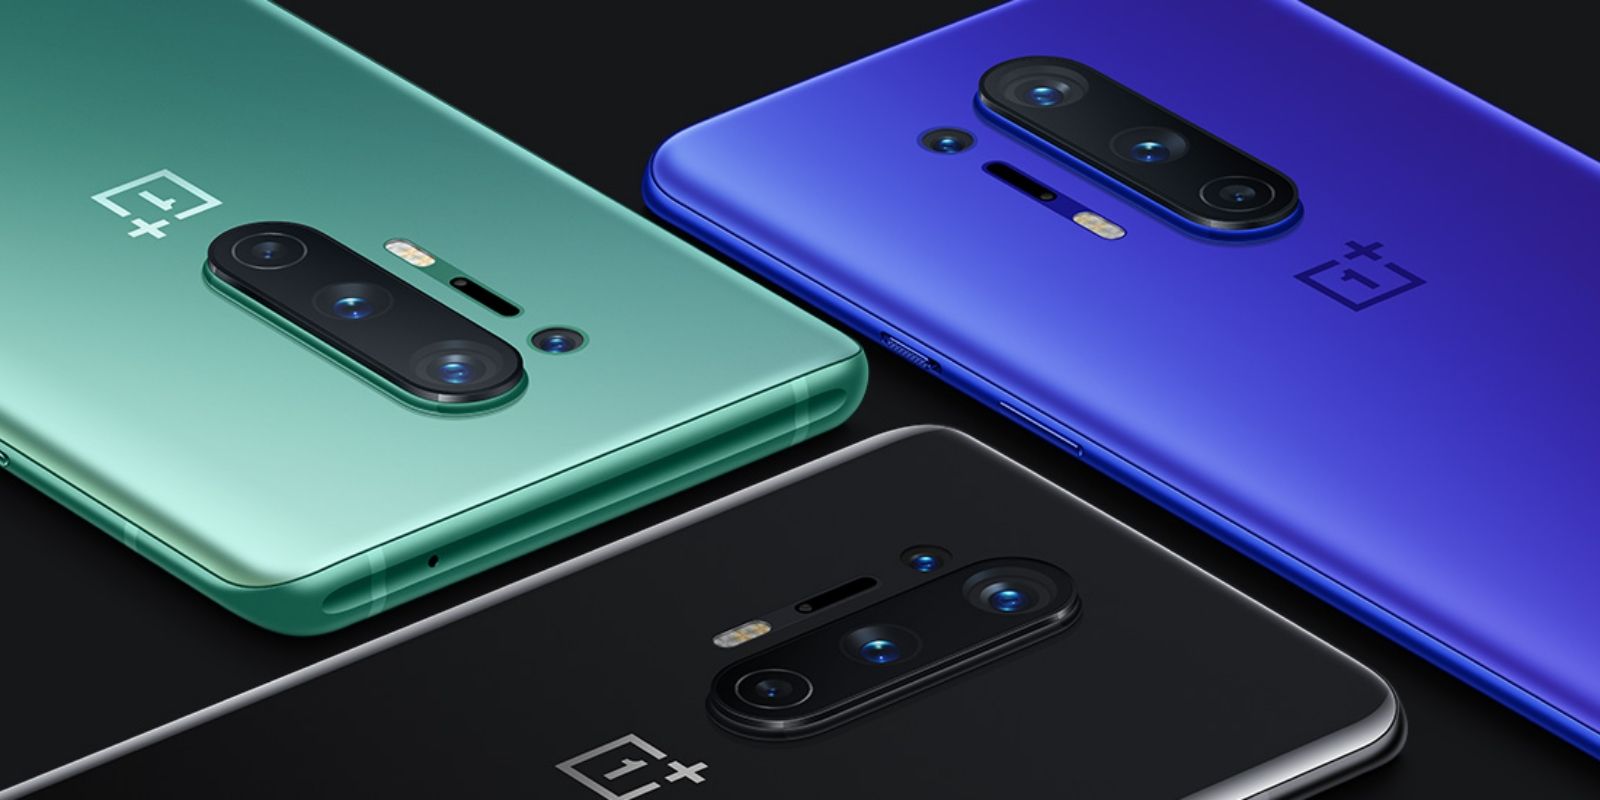 OnePlus 8 Pro different colors